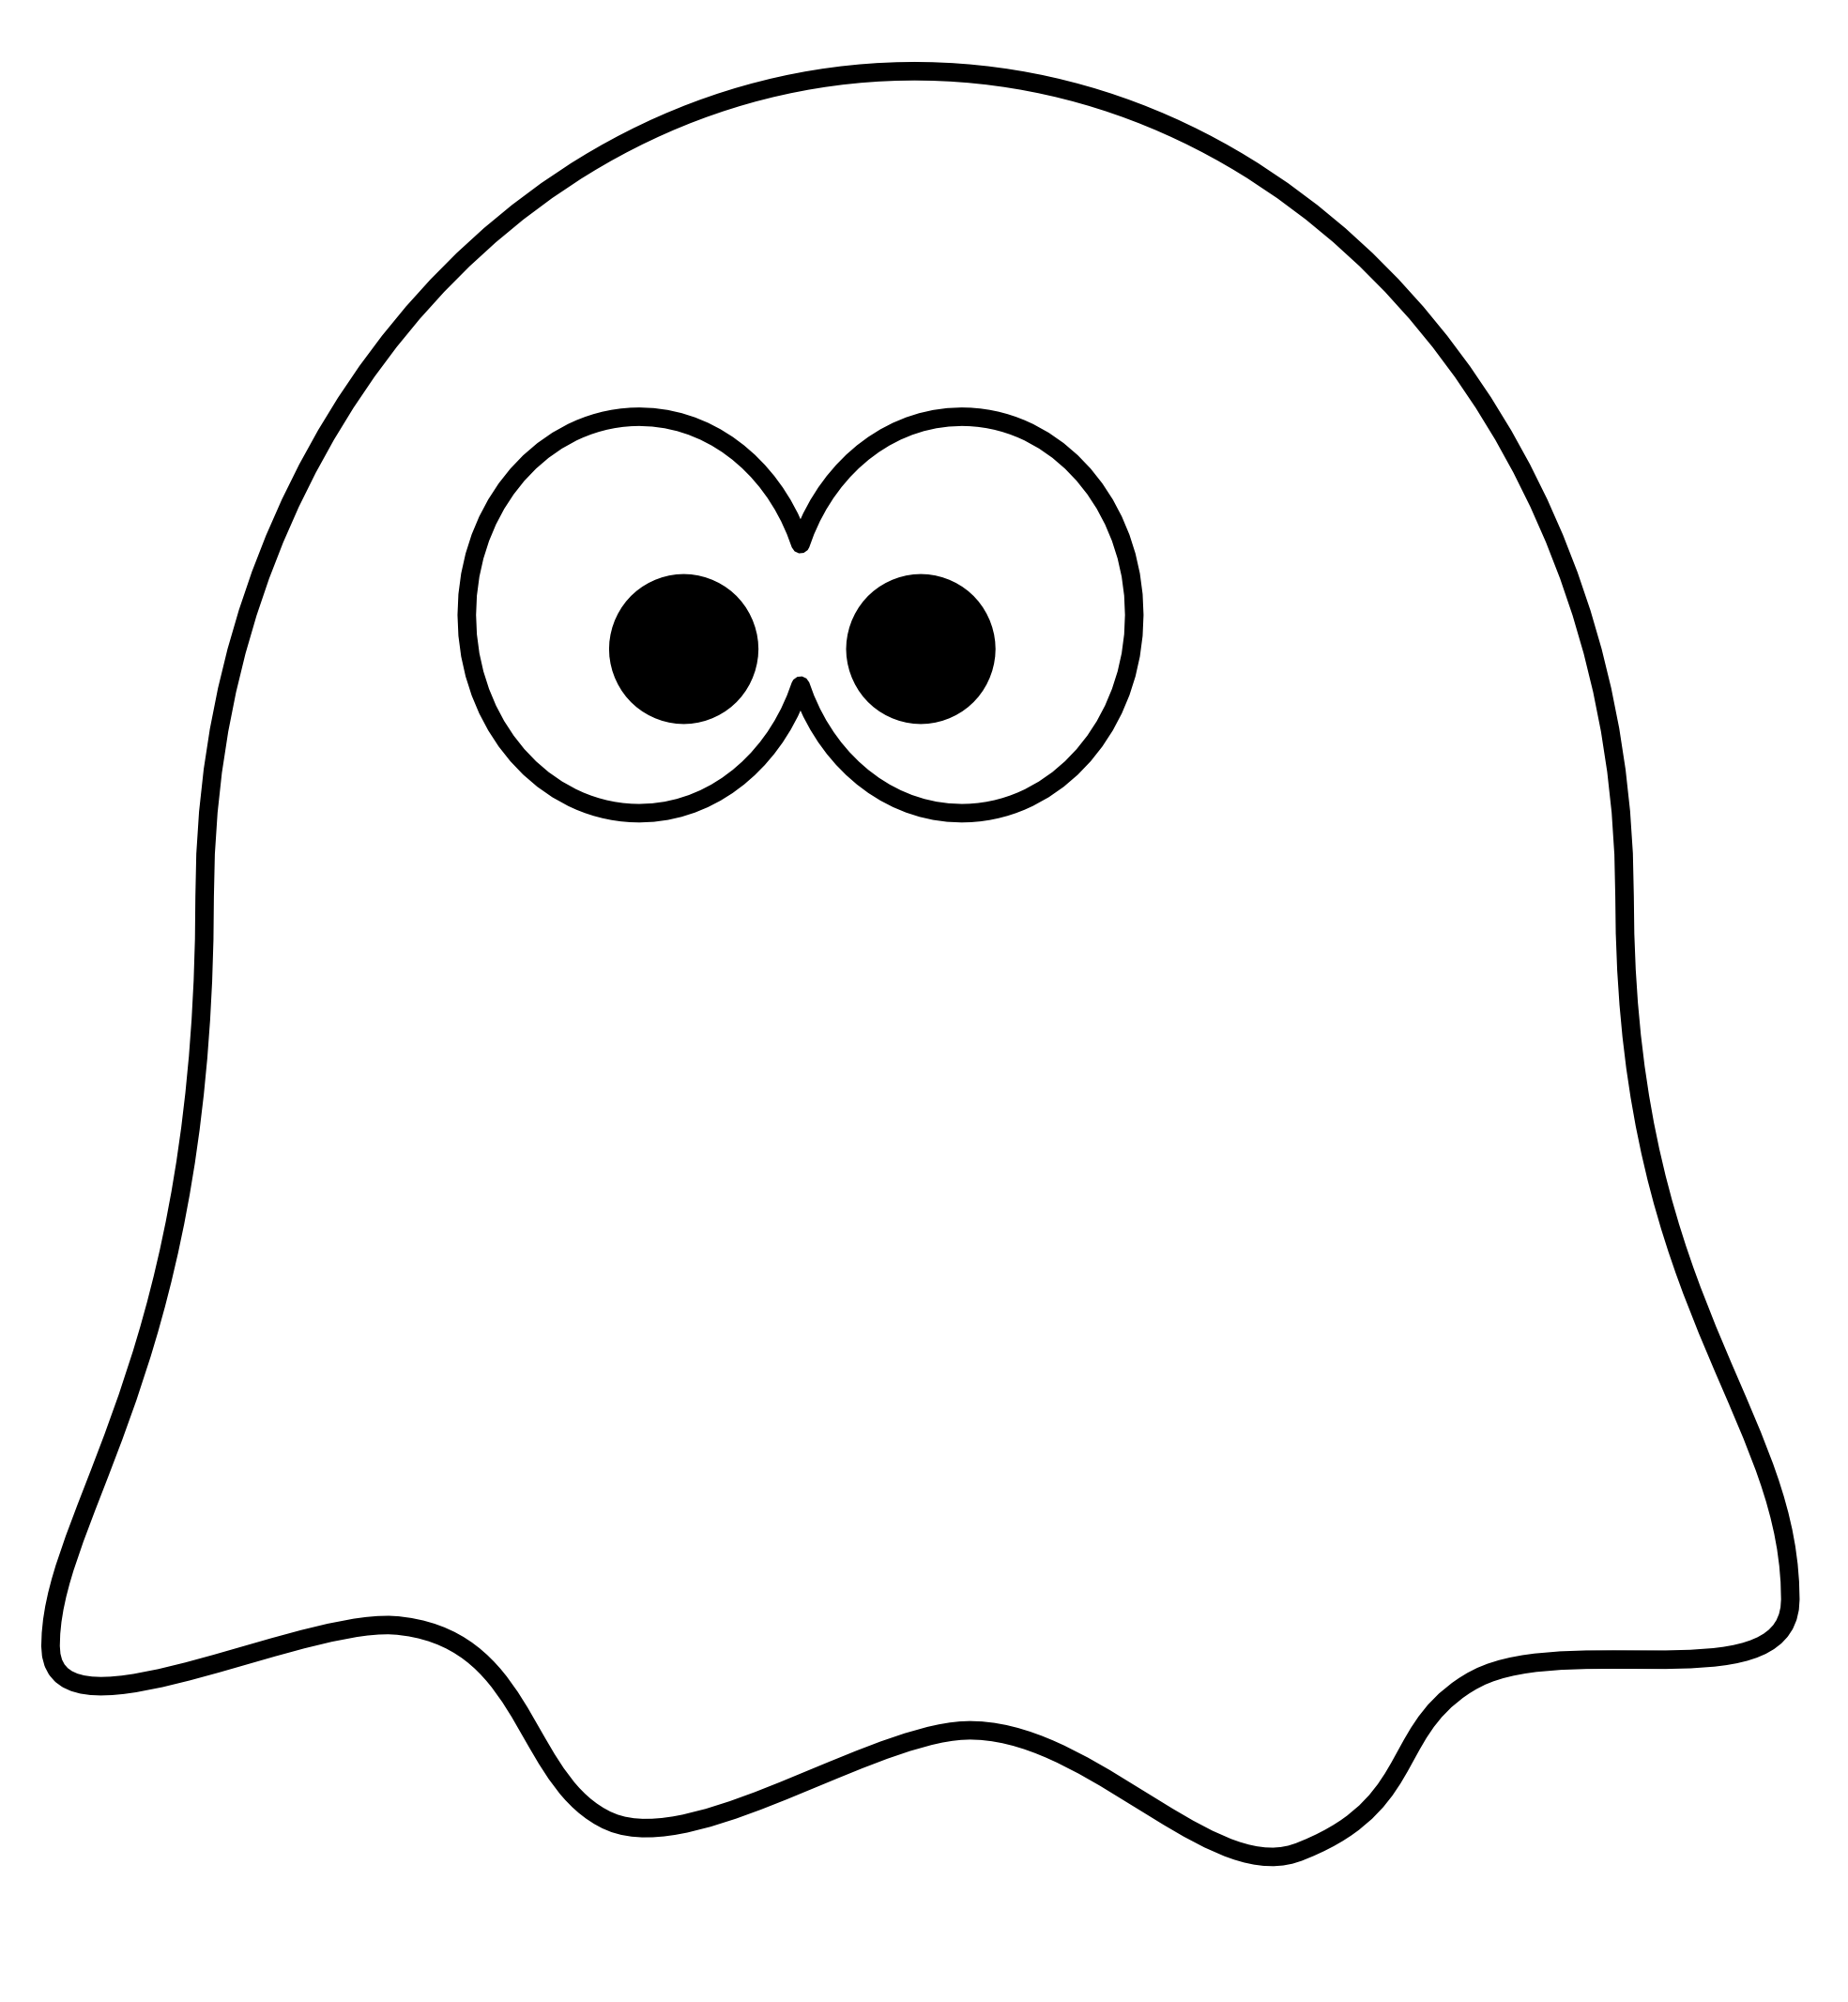 Clip art panda free. Clipart ghost ghost outline